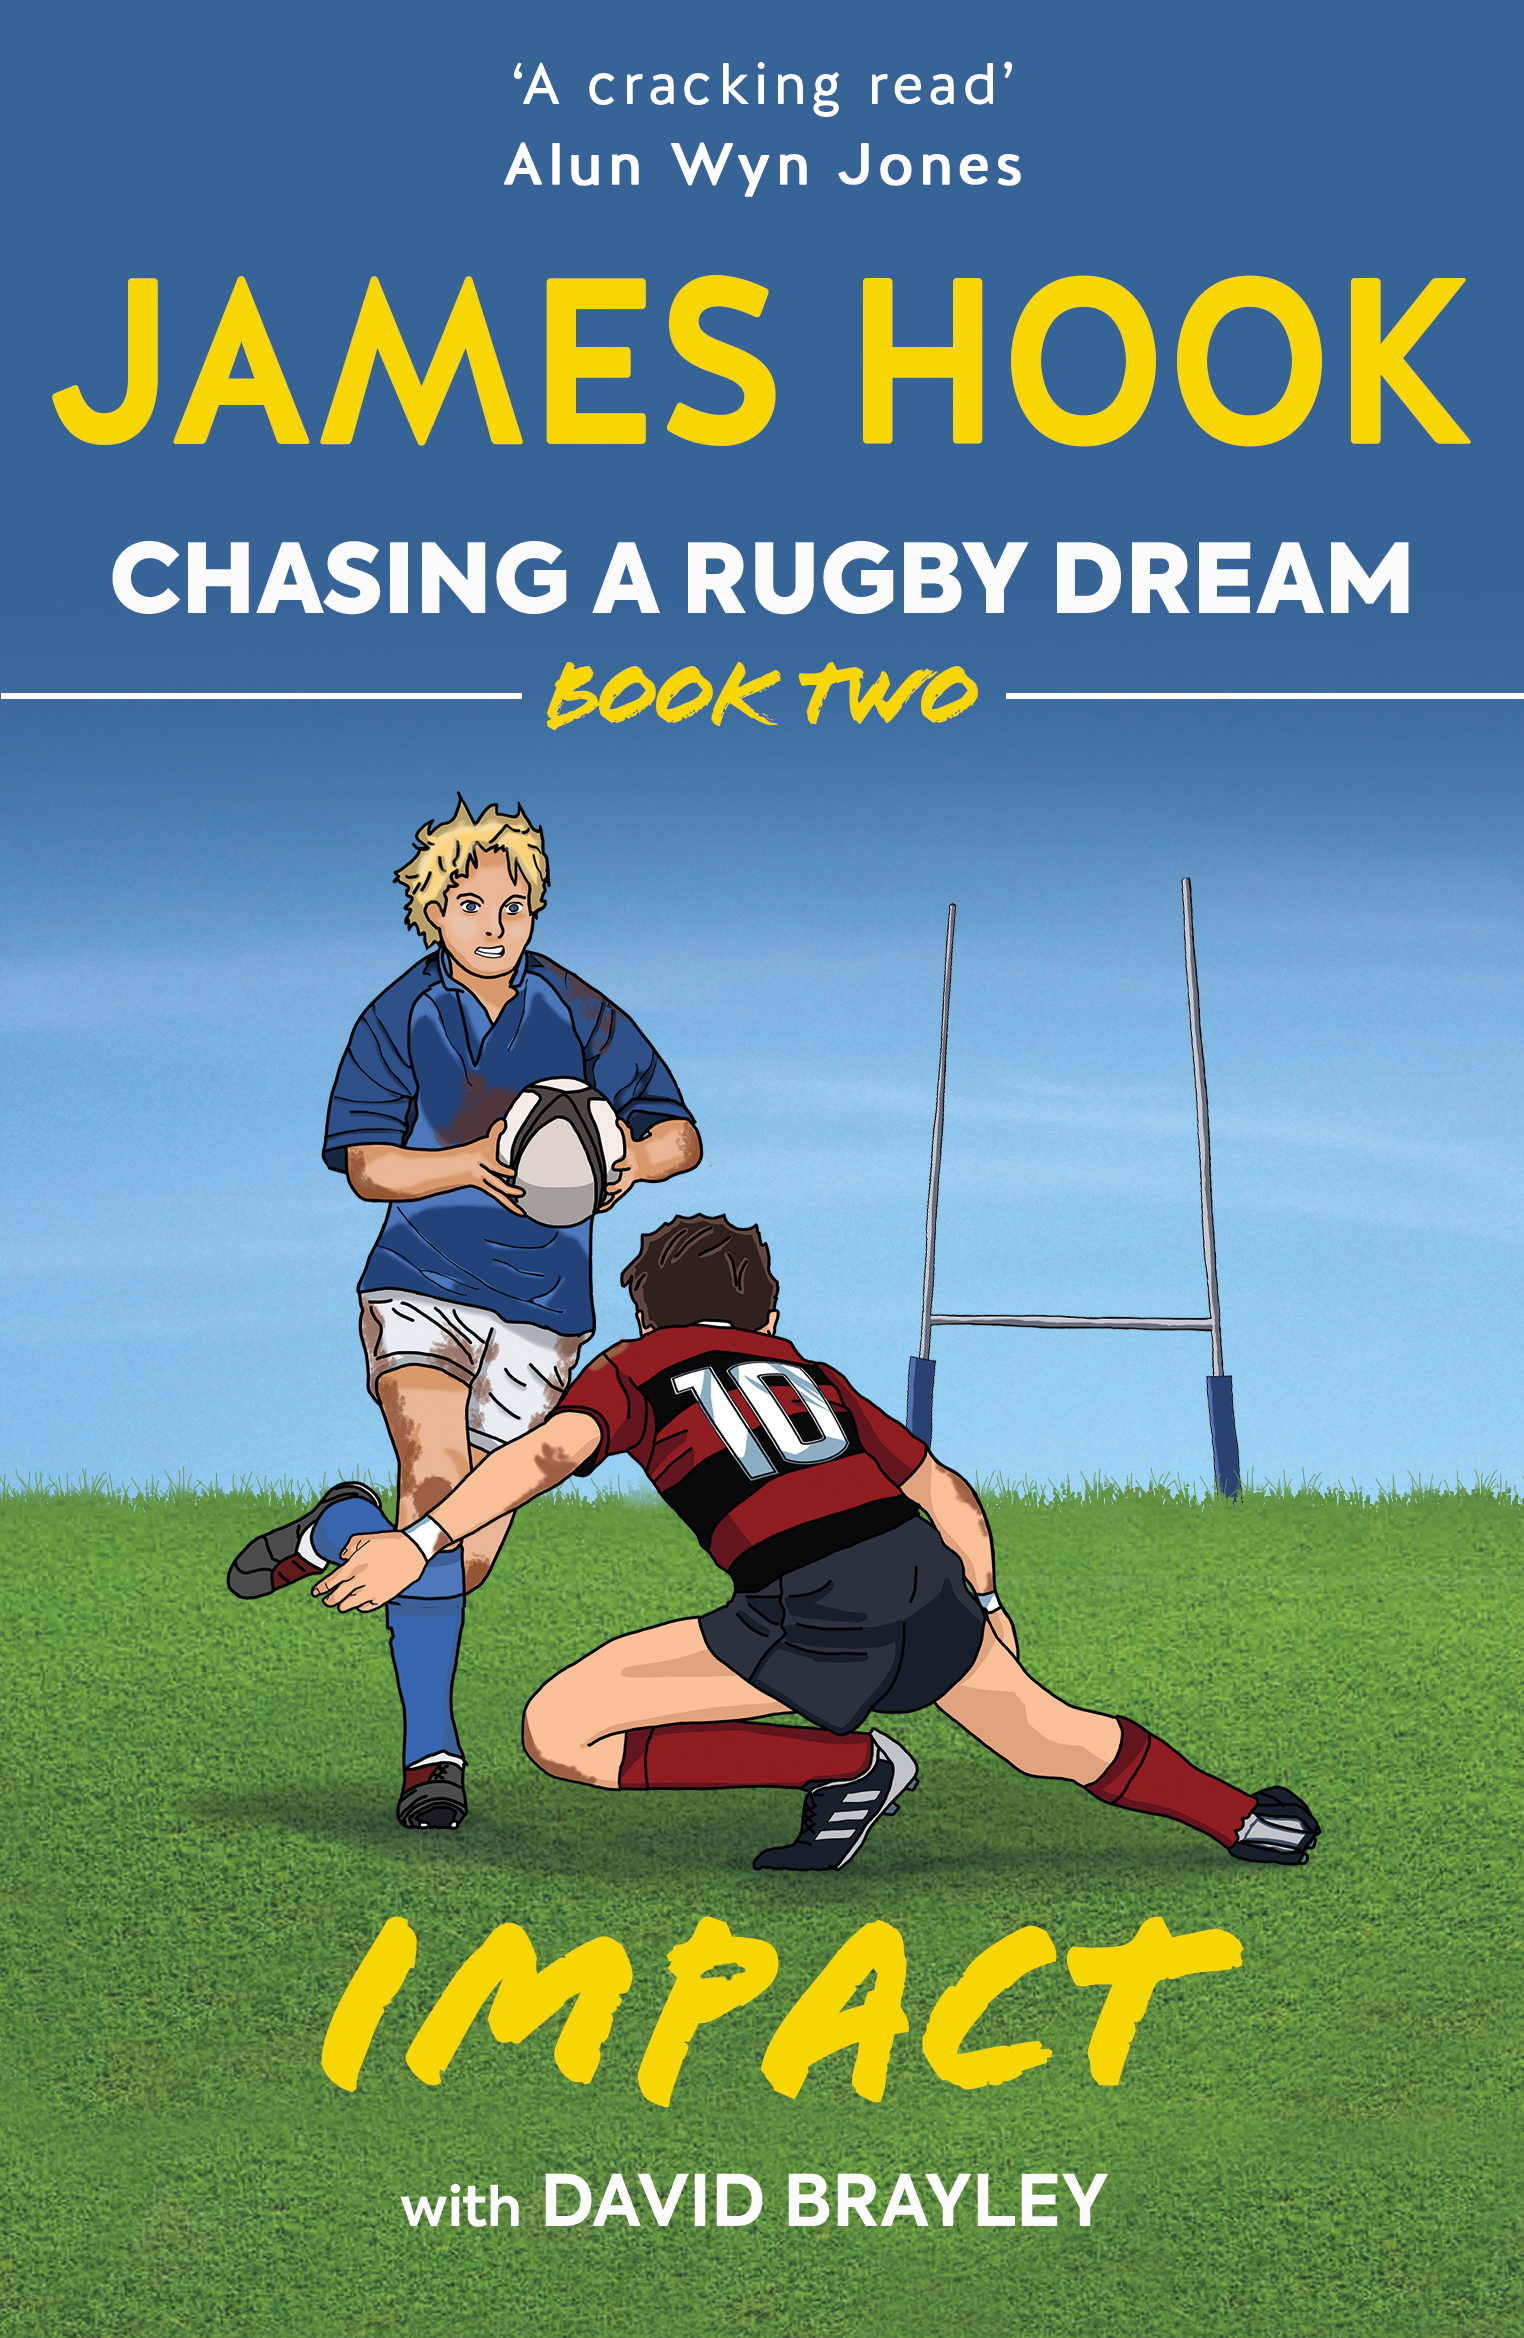 Chasing_a_Rugby_Dream_-_book_2_front_cover